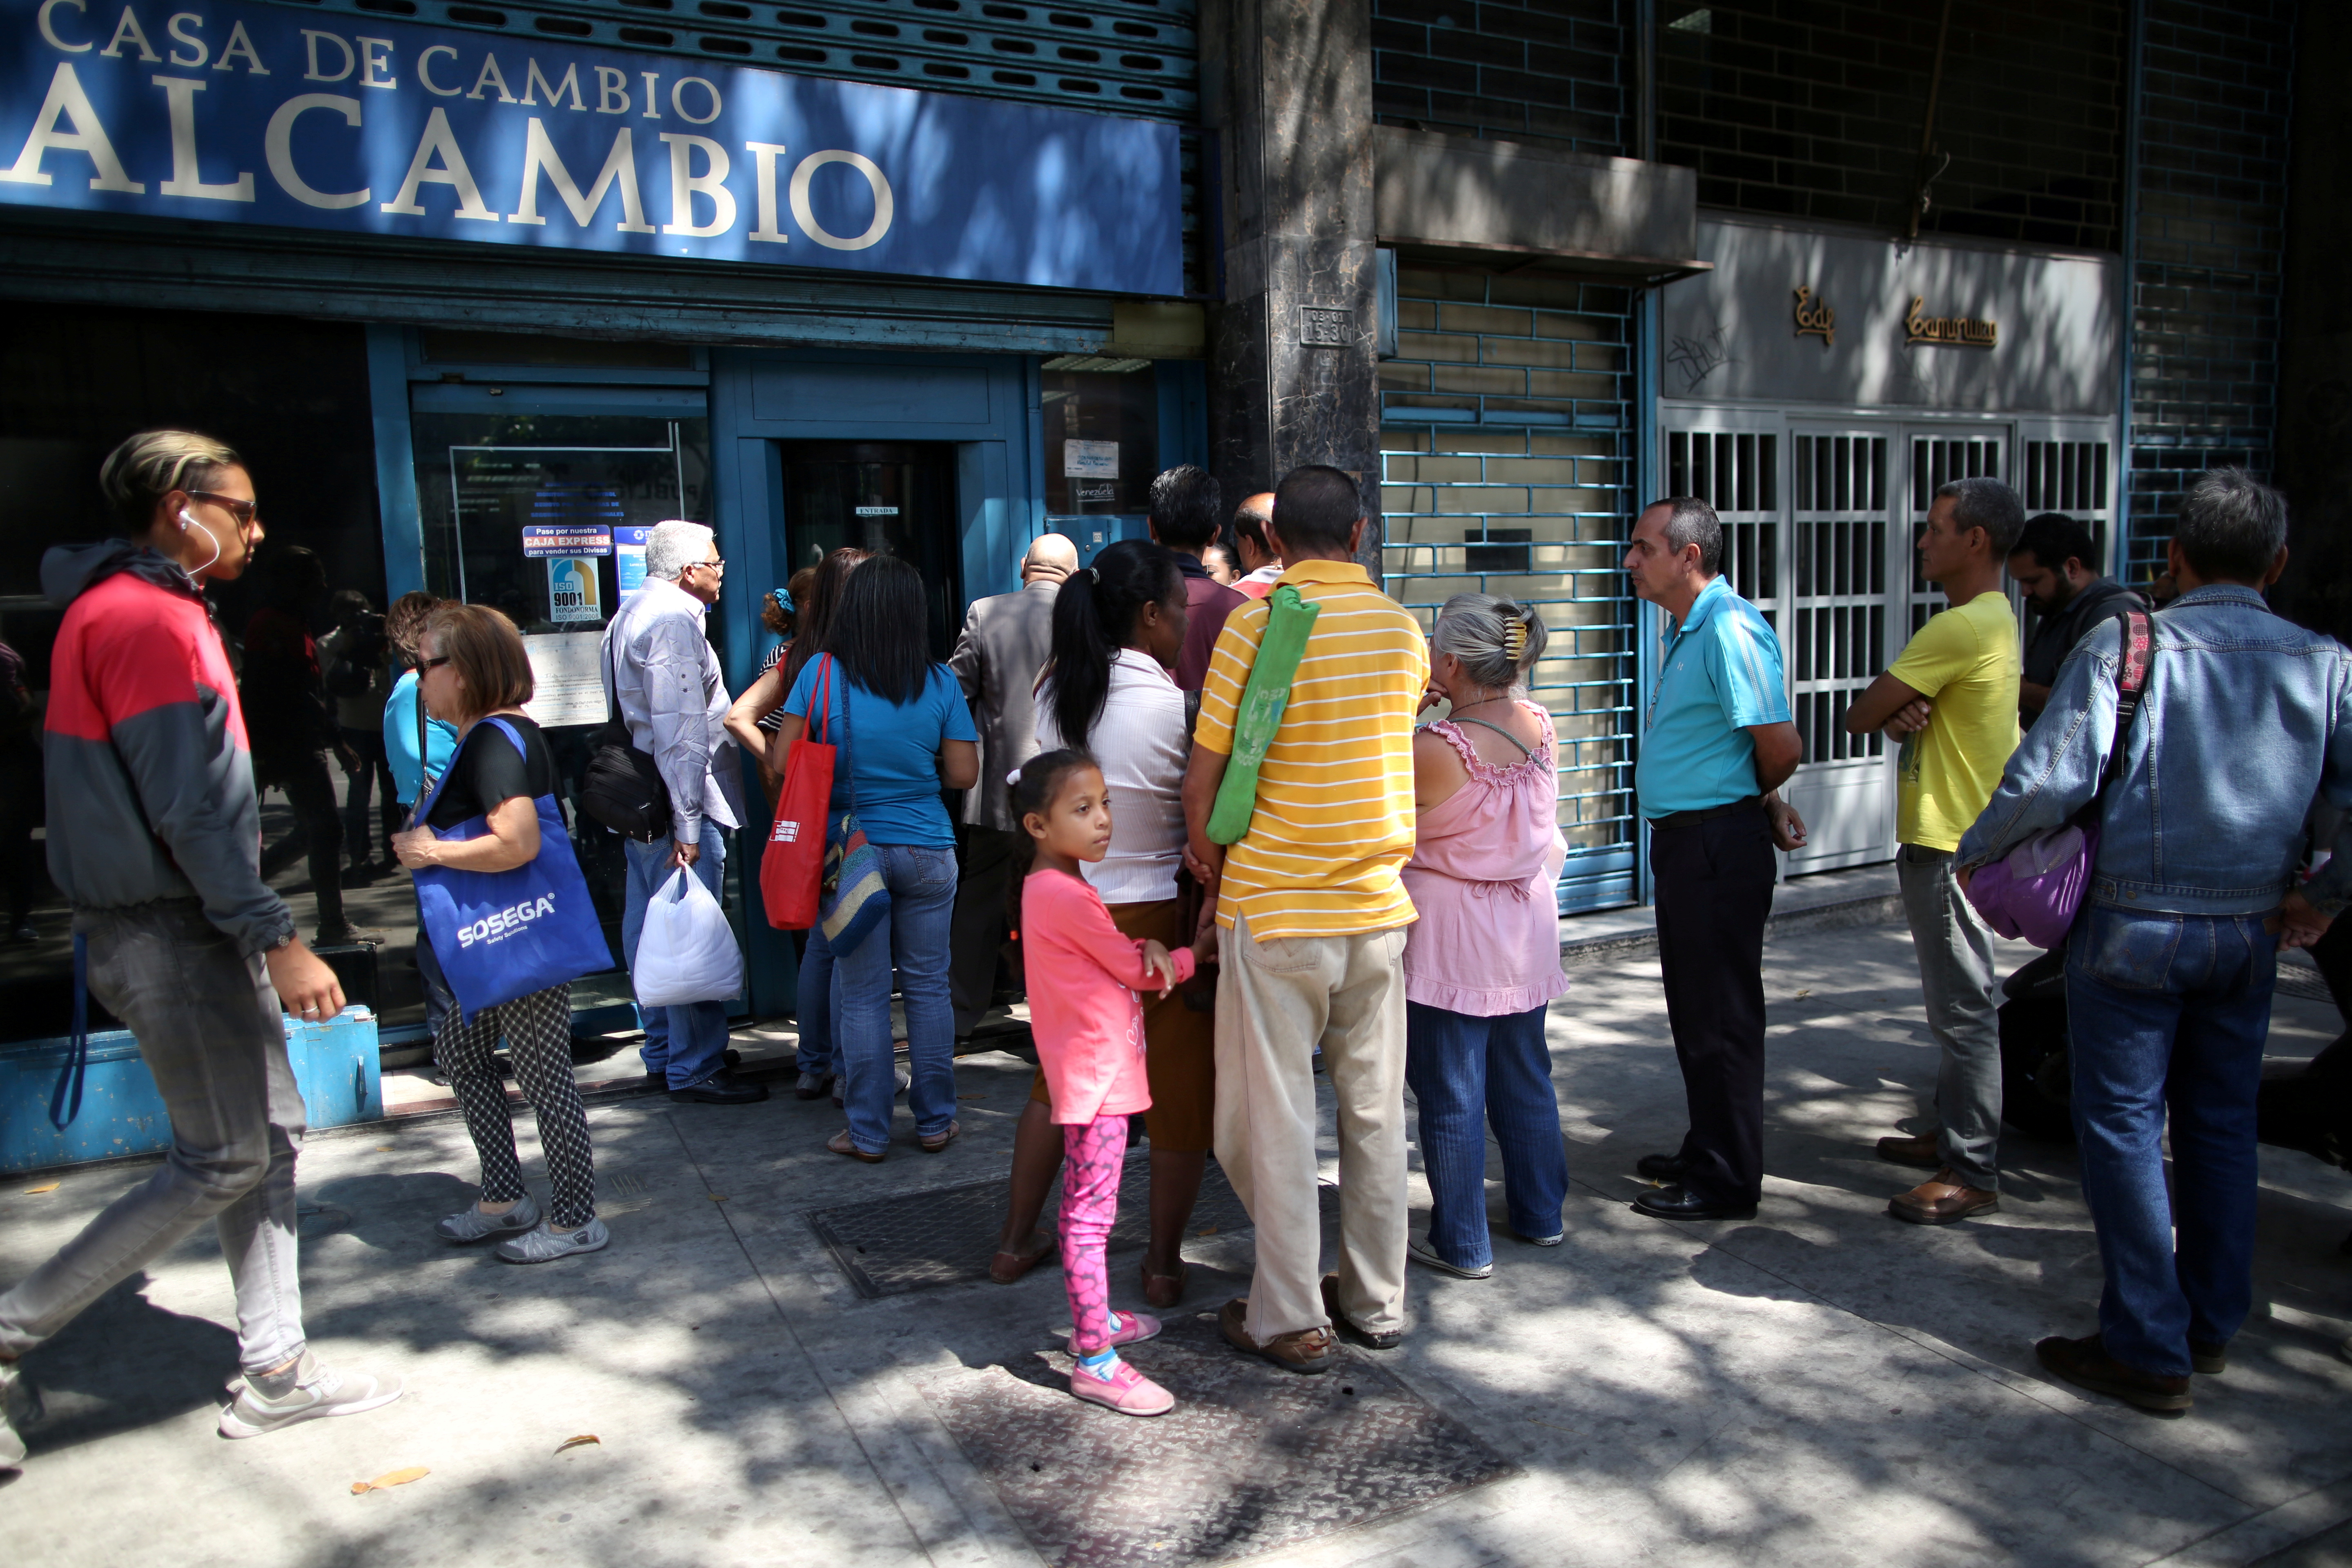 People wait in line outside of a currency exchange house in Caracas